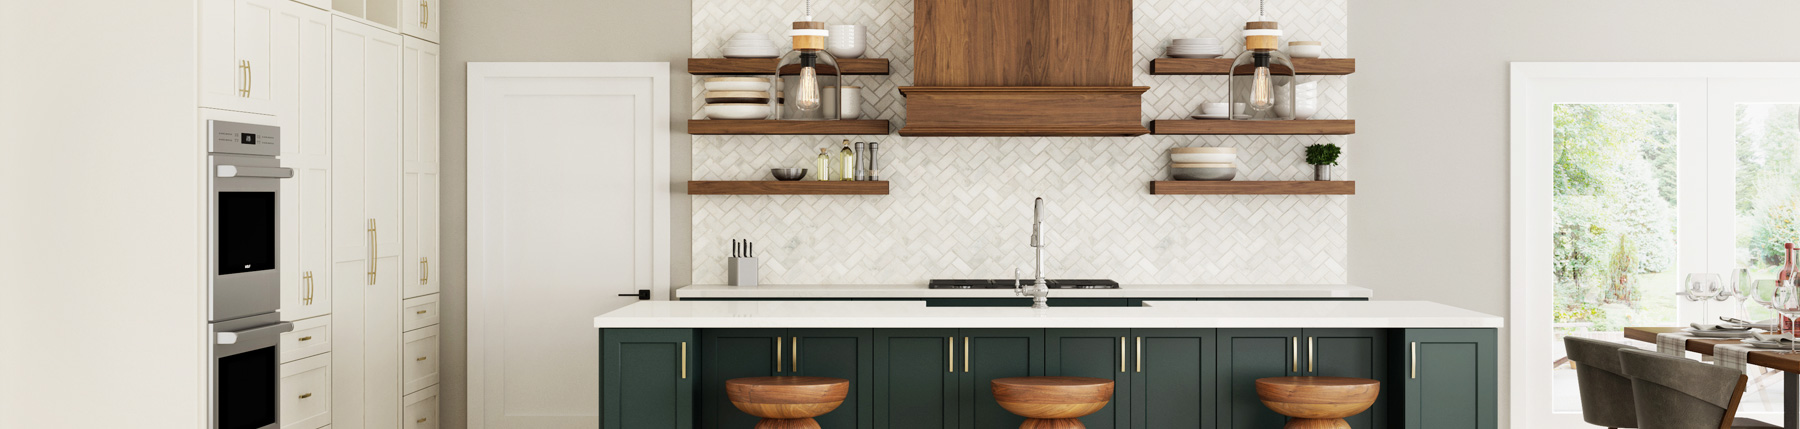 Our Top 4 Kitchen Design Trends - Canyon Creek Cabinet Company